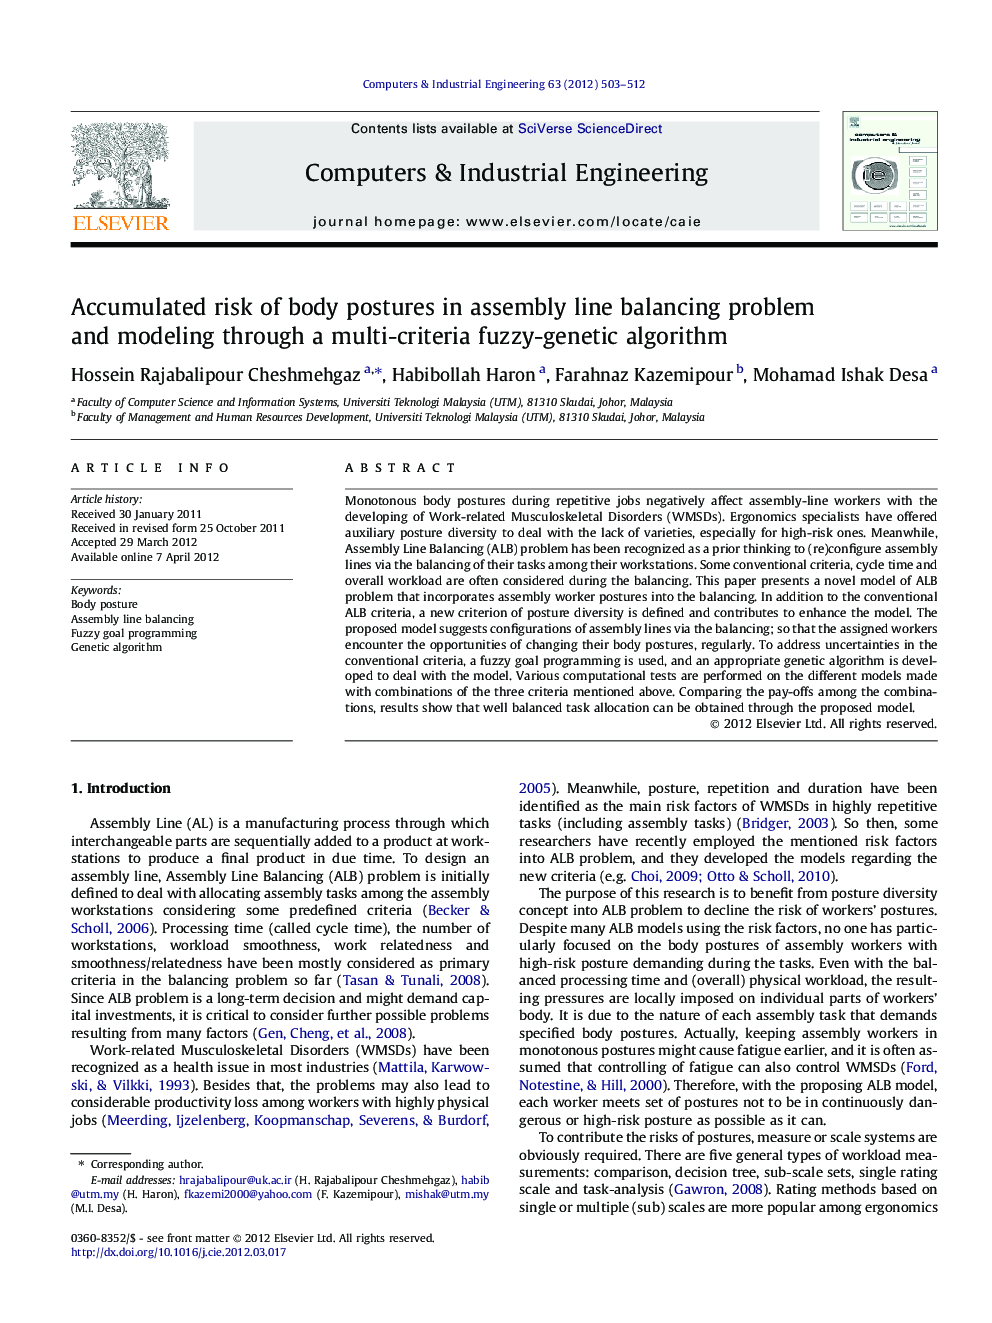 Accumulated risk of body postures in assembly line balancing problem and modeling through a multi-criteria fuzzy-genetic algorithm